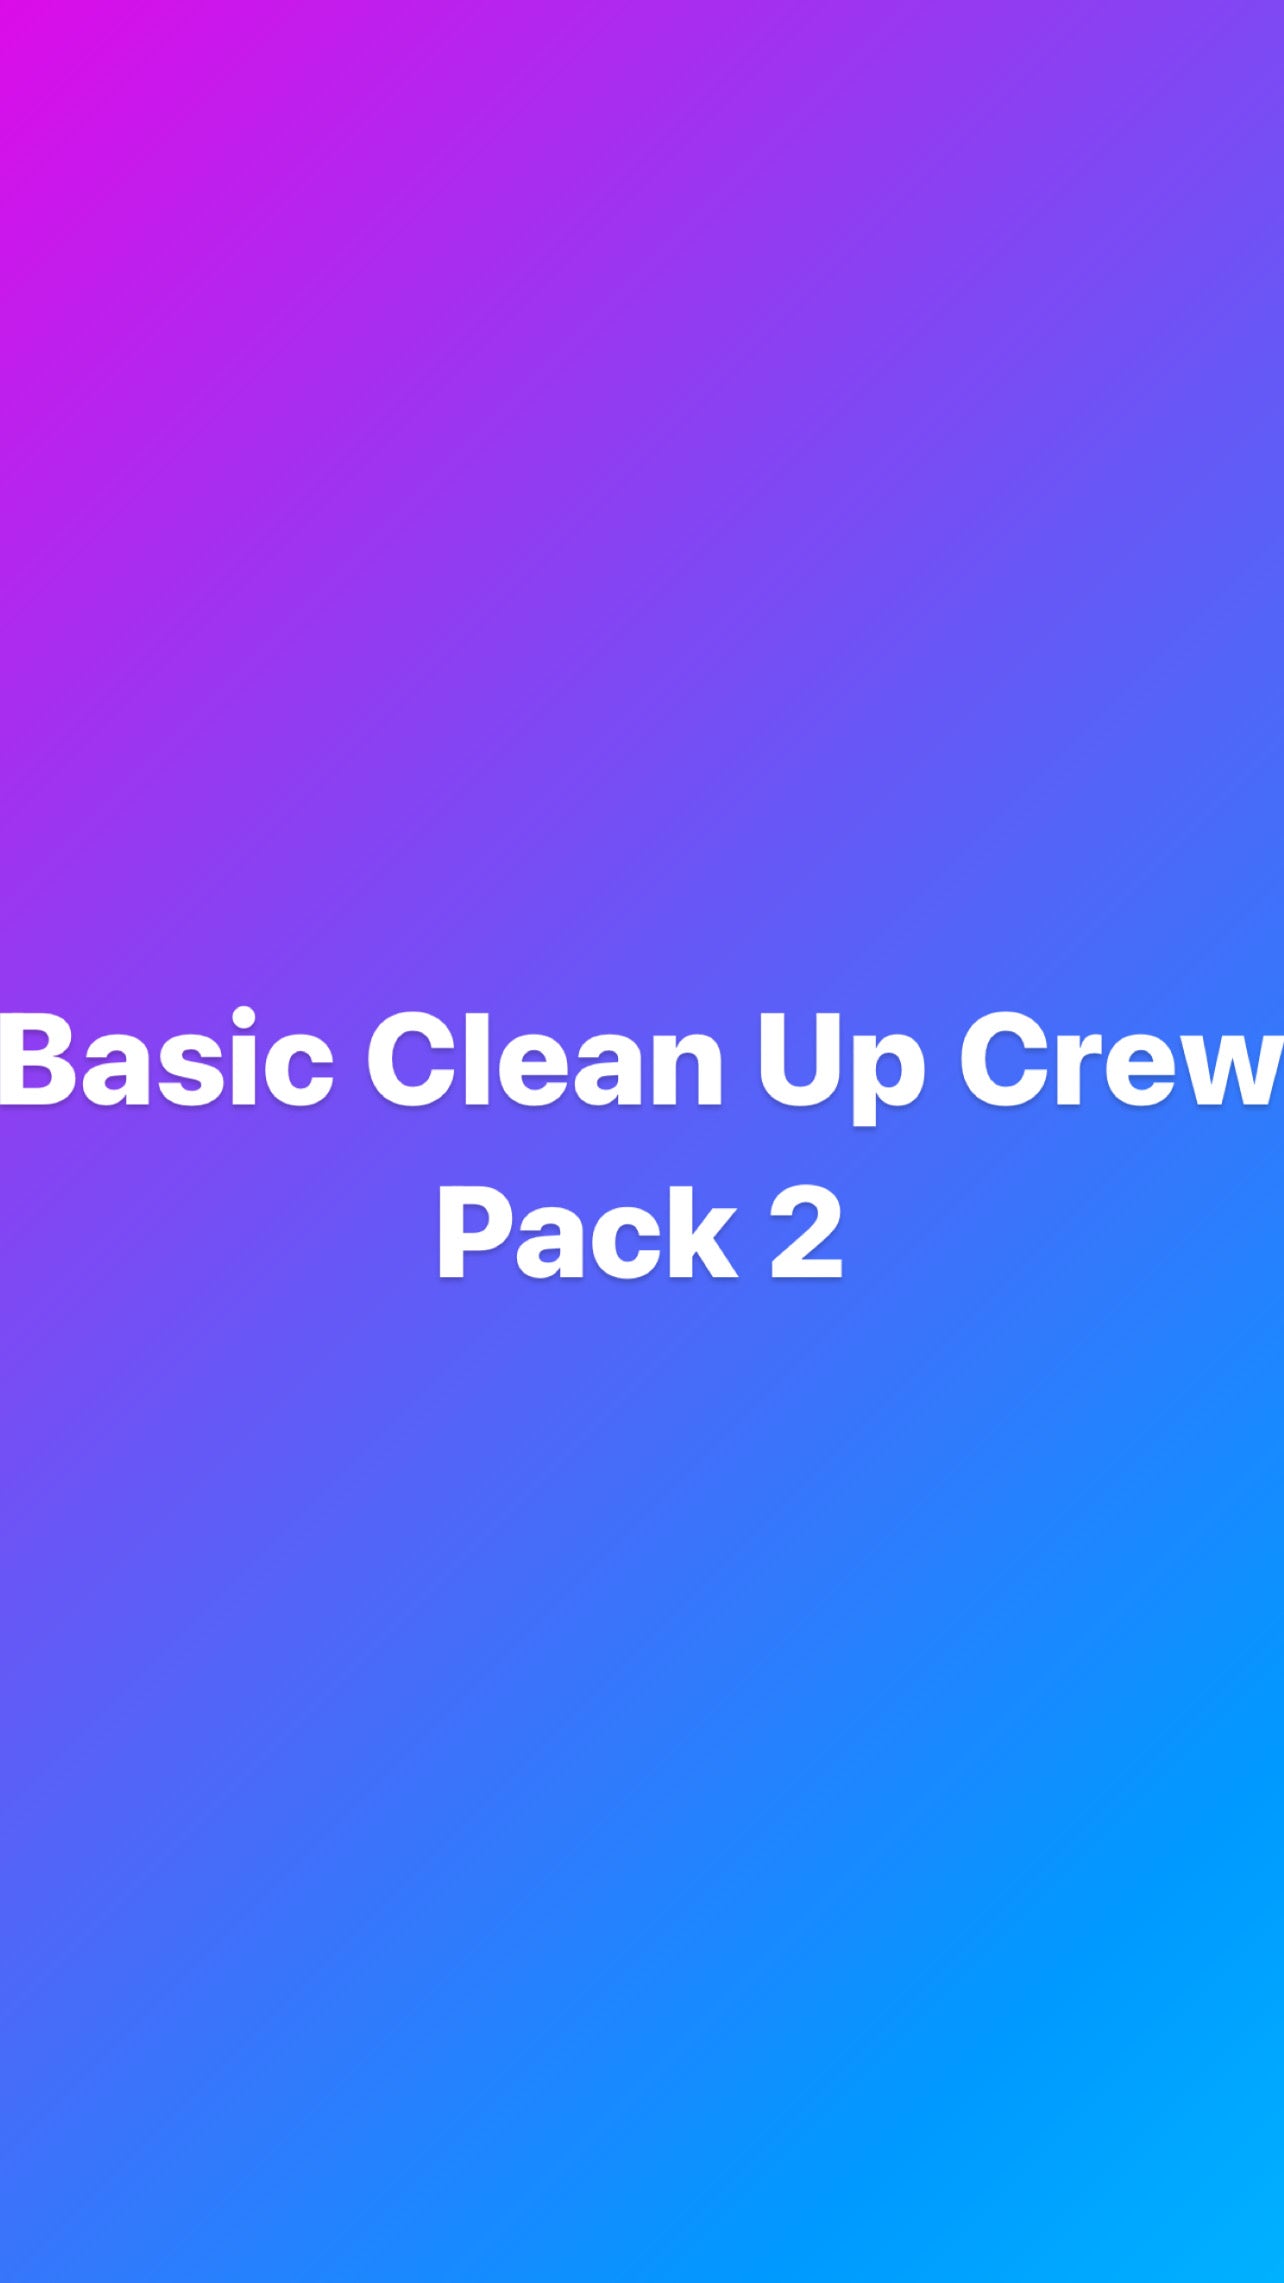 Basic Clean Up Crew Pack 2